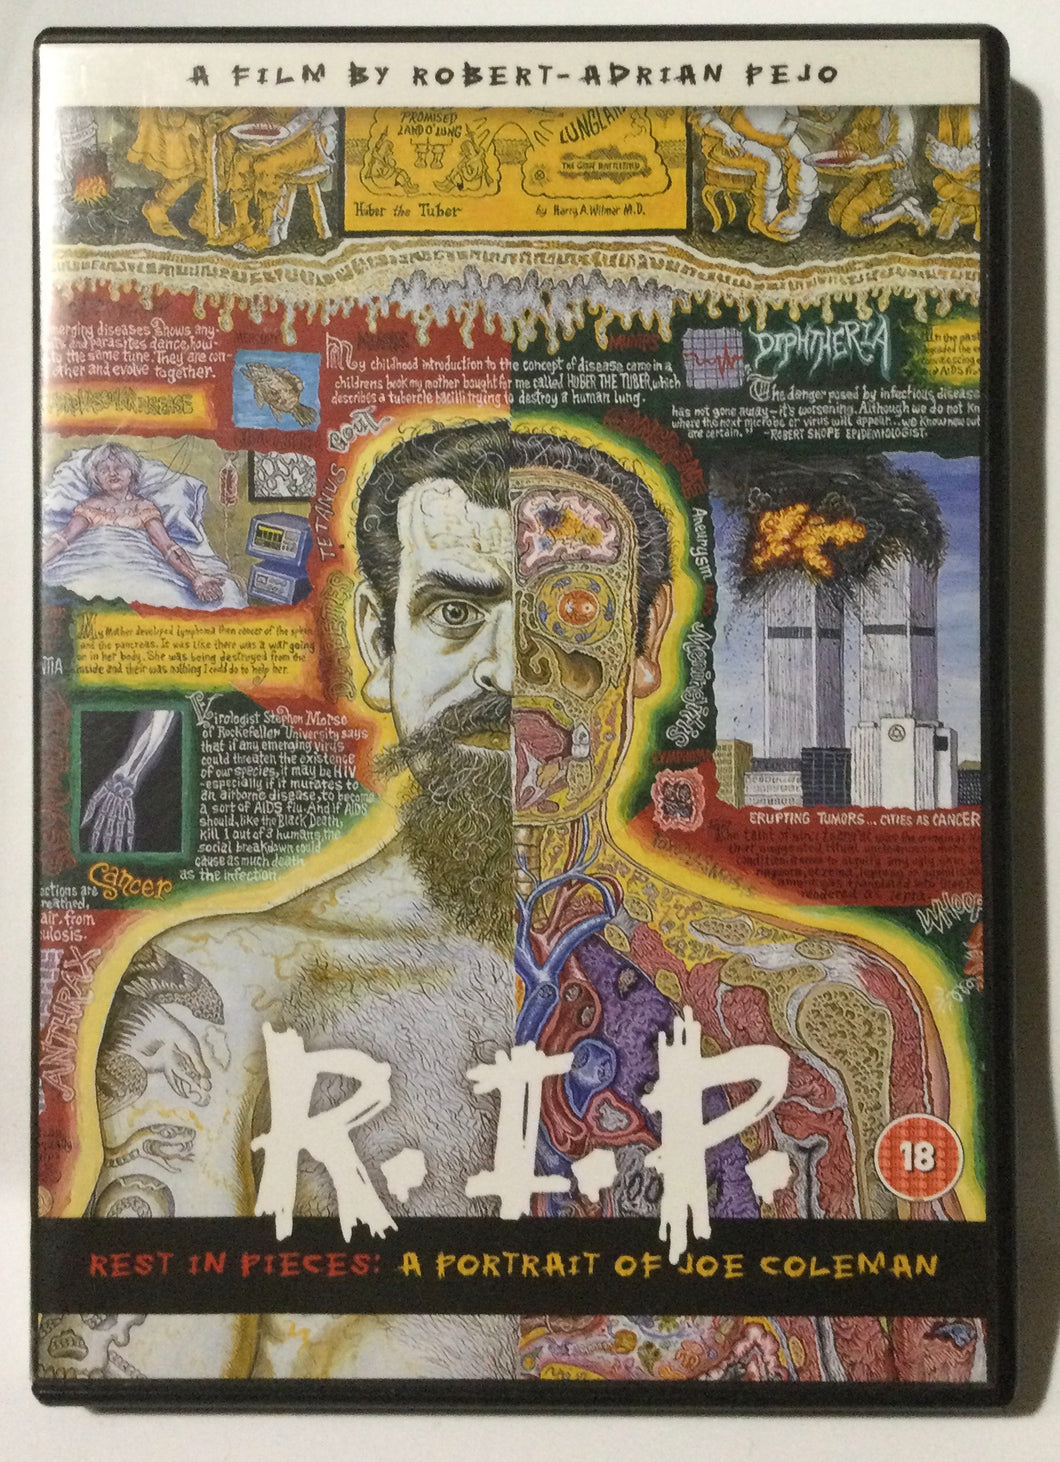 R.I.P. REST IN PIECES: A PORTRAIT OF JOE COLEMAN DVD CULT ARTIST DOCUMENTARY